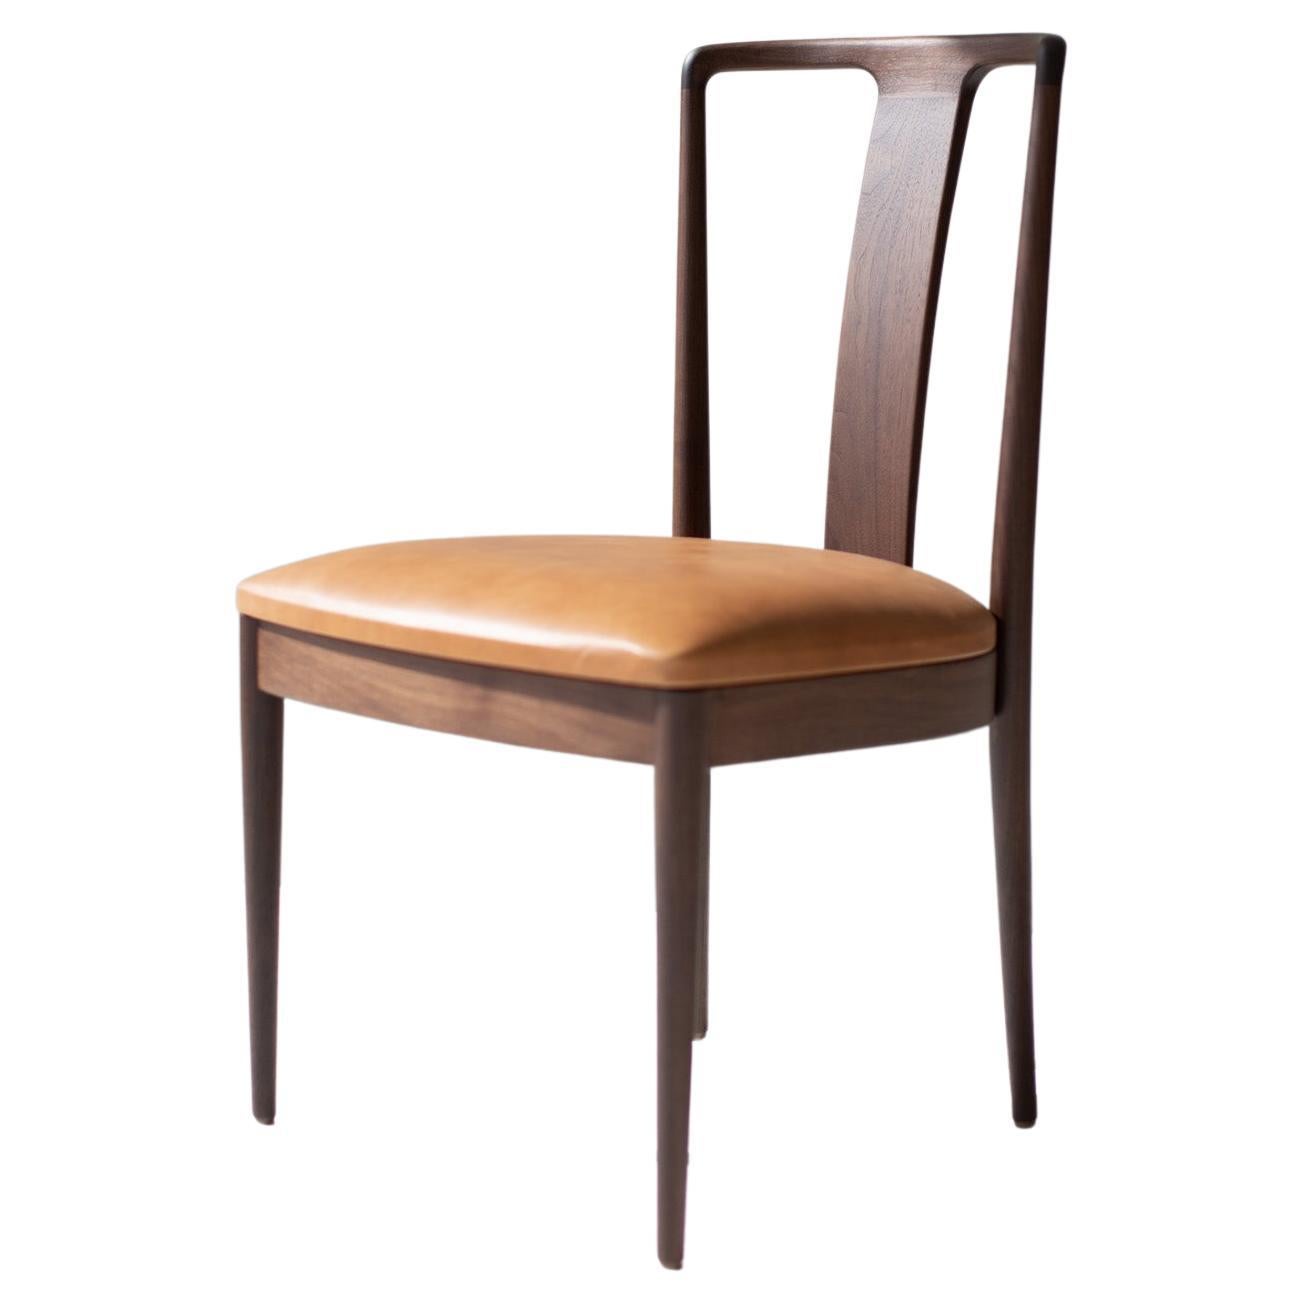 Derby Dining Chairs, Modern Wood Dining Chairs, Walnut, Leather, Peabody, Craft For Sale